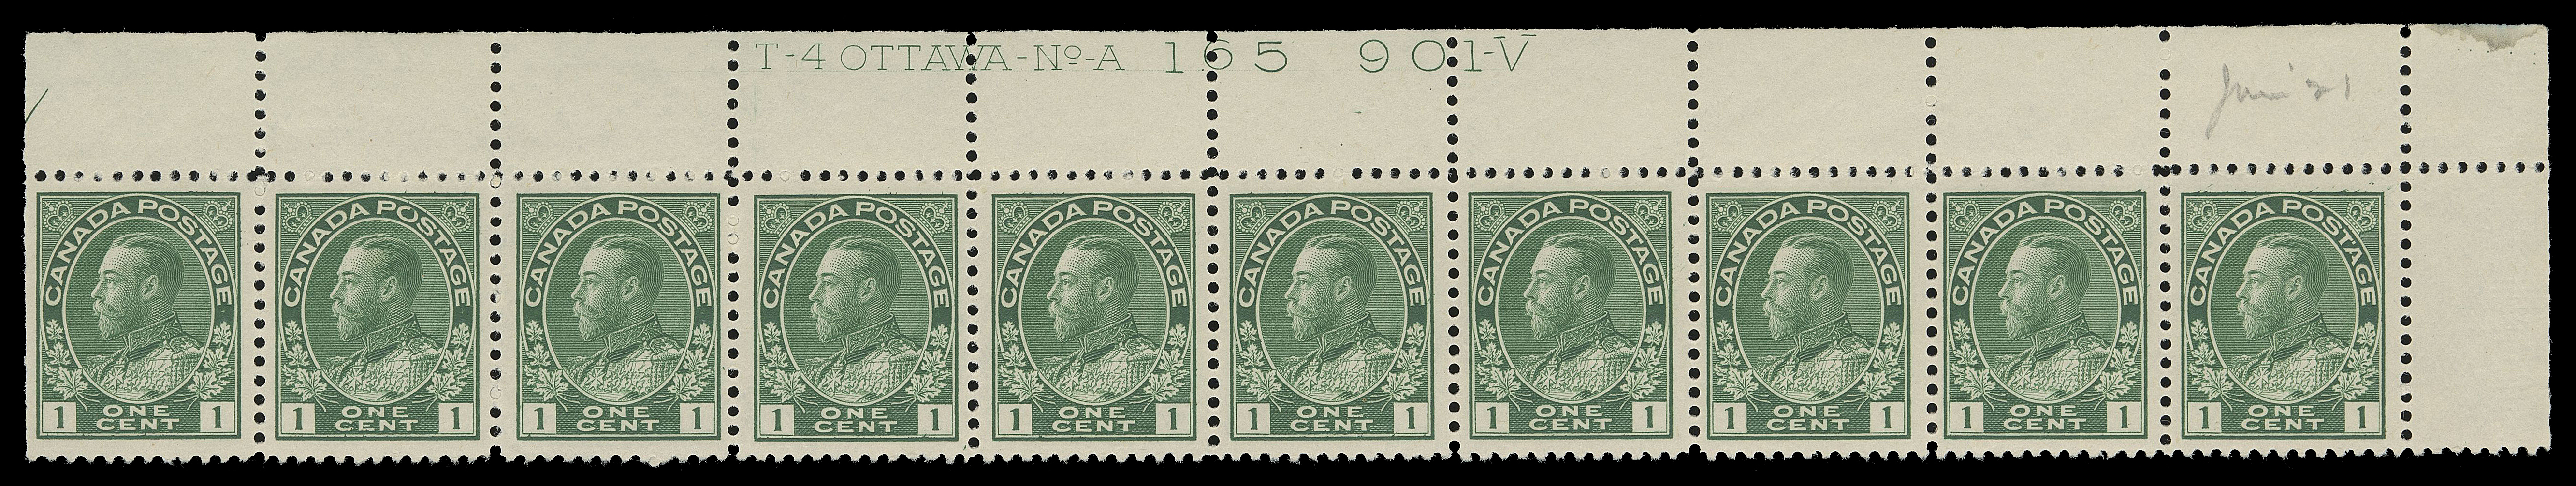 ADMIRAL STAMPS  104ii,Matching UR Plate 165 & 166 strips of ten with printing order number "901-V", distinctive rich shade on fresh wove paper, reasonably to well centered, both LH in selvedge leaving stamps NH; the sole recorded plate multiples recorded for these plate numbers per the Glen Lundeen census on the BNAPS website, F-VF (Unitrade cat. $1,900)